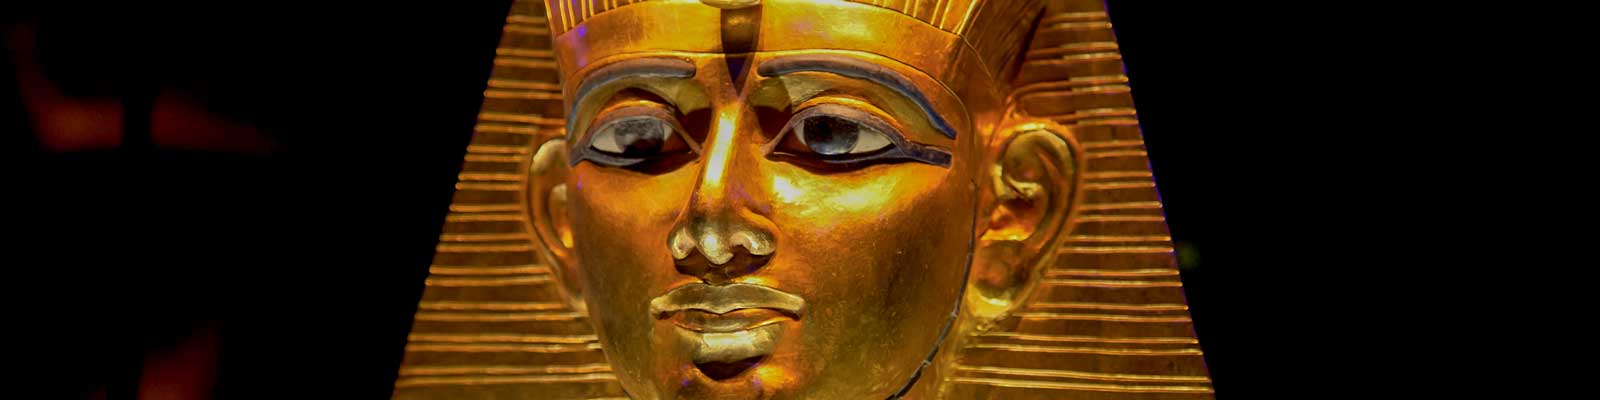 📚 Egypt Is a Gift of the Nile - Paper Example | SpeedyPaper.com-thunohoangphong.vn